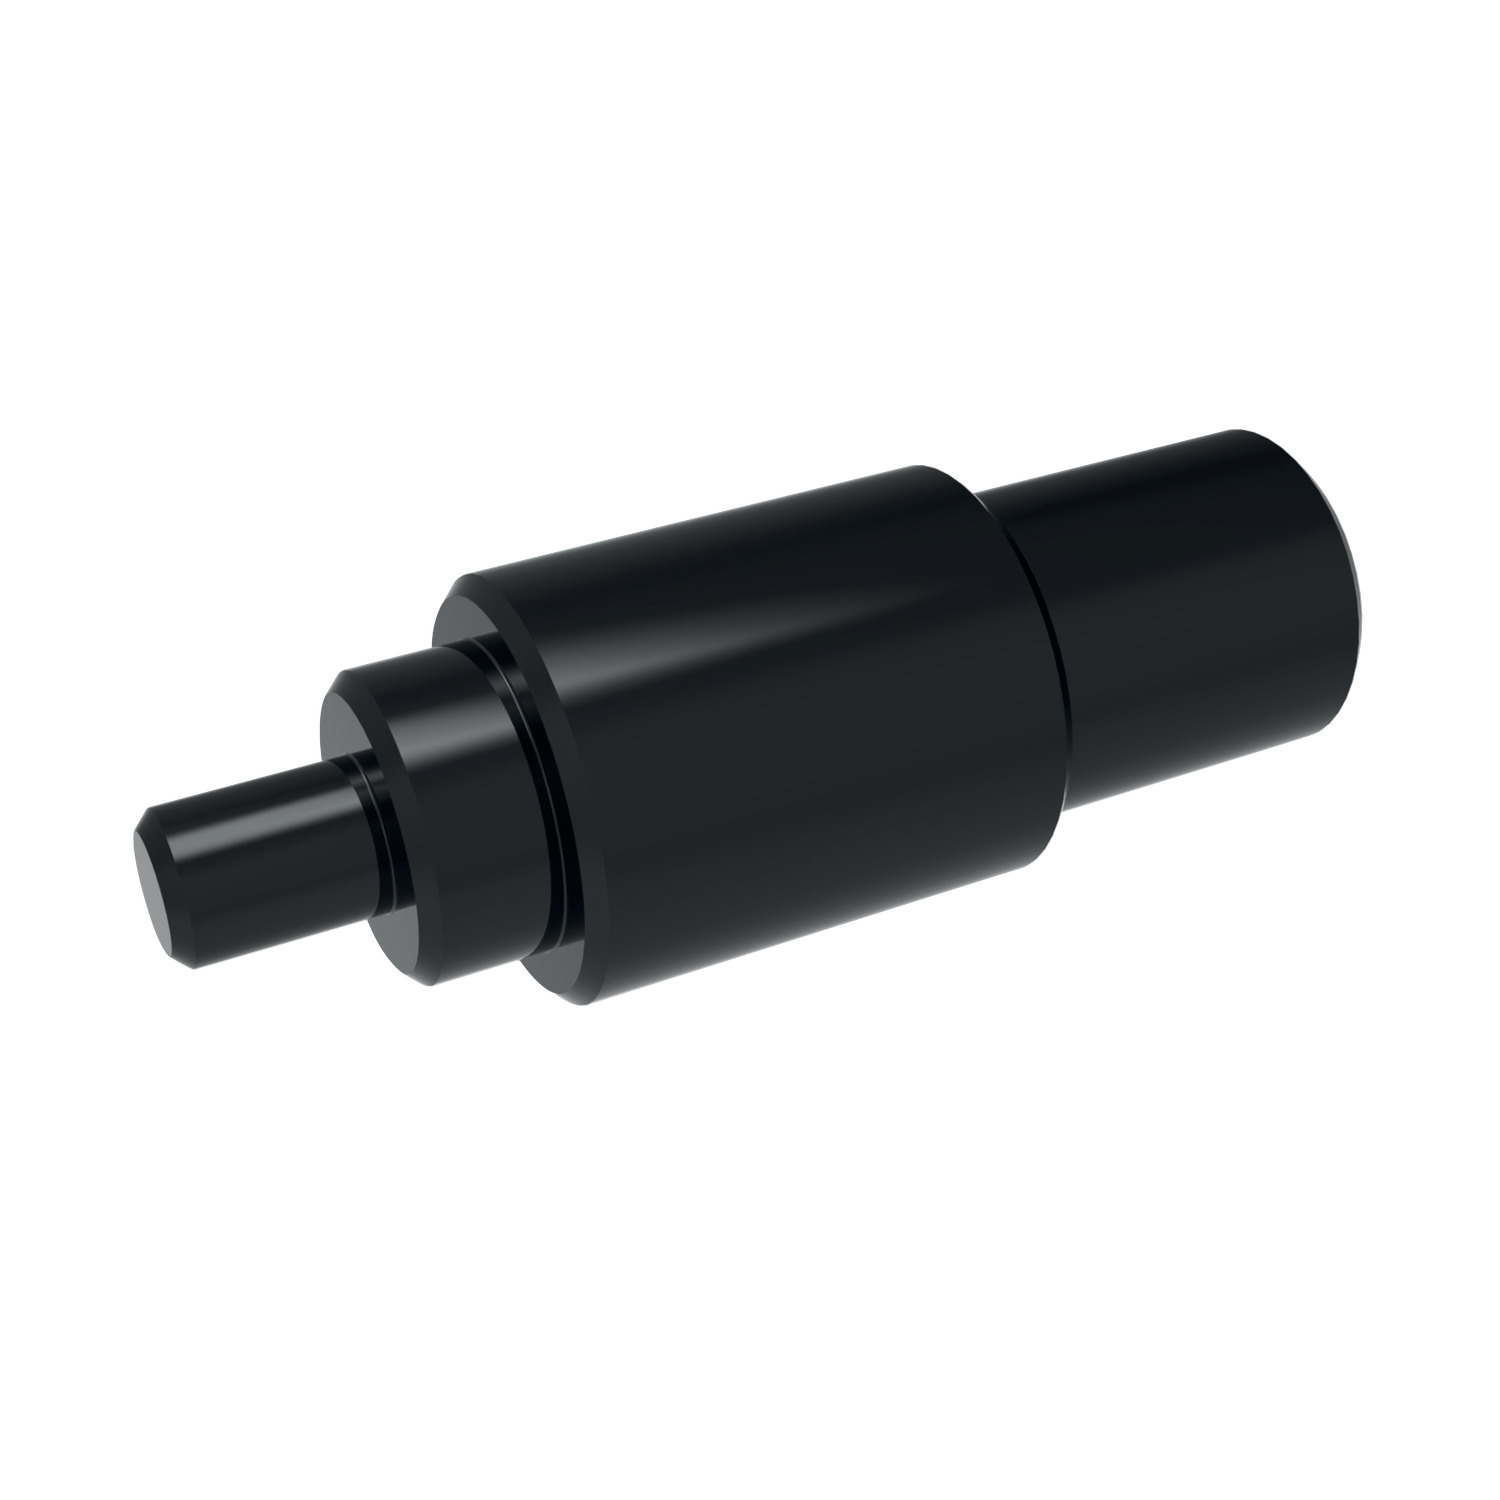 Installation Tool - Inch - Thinwall For threaded inserts 22020 and 22030.